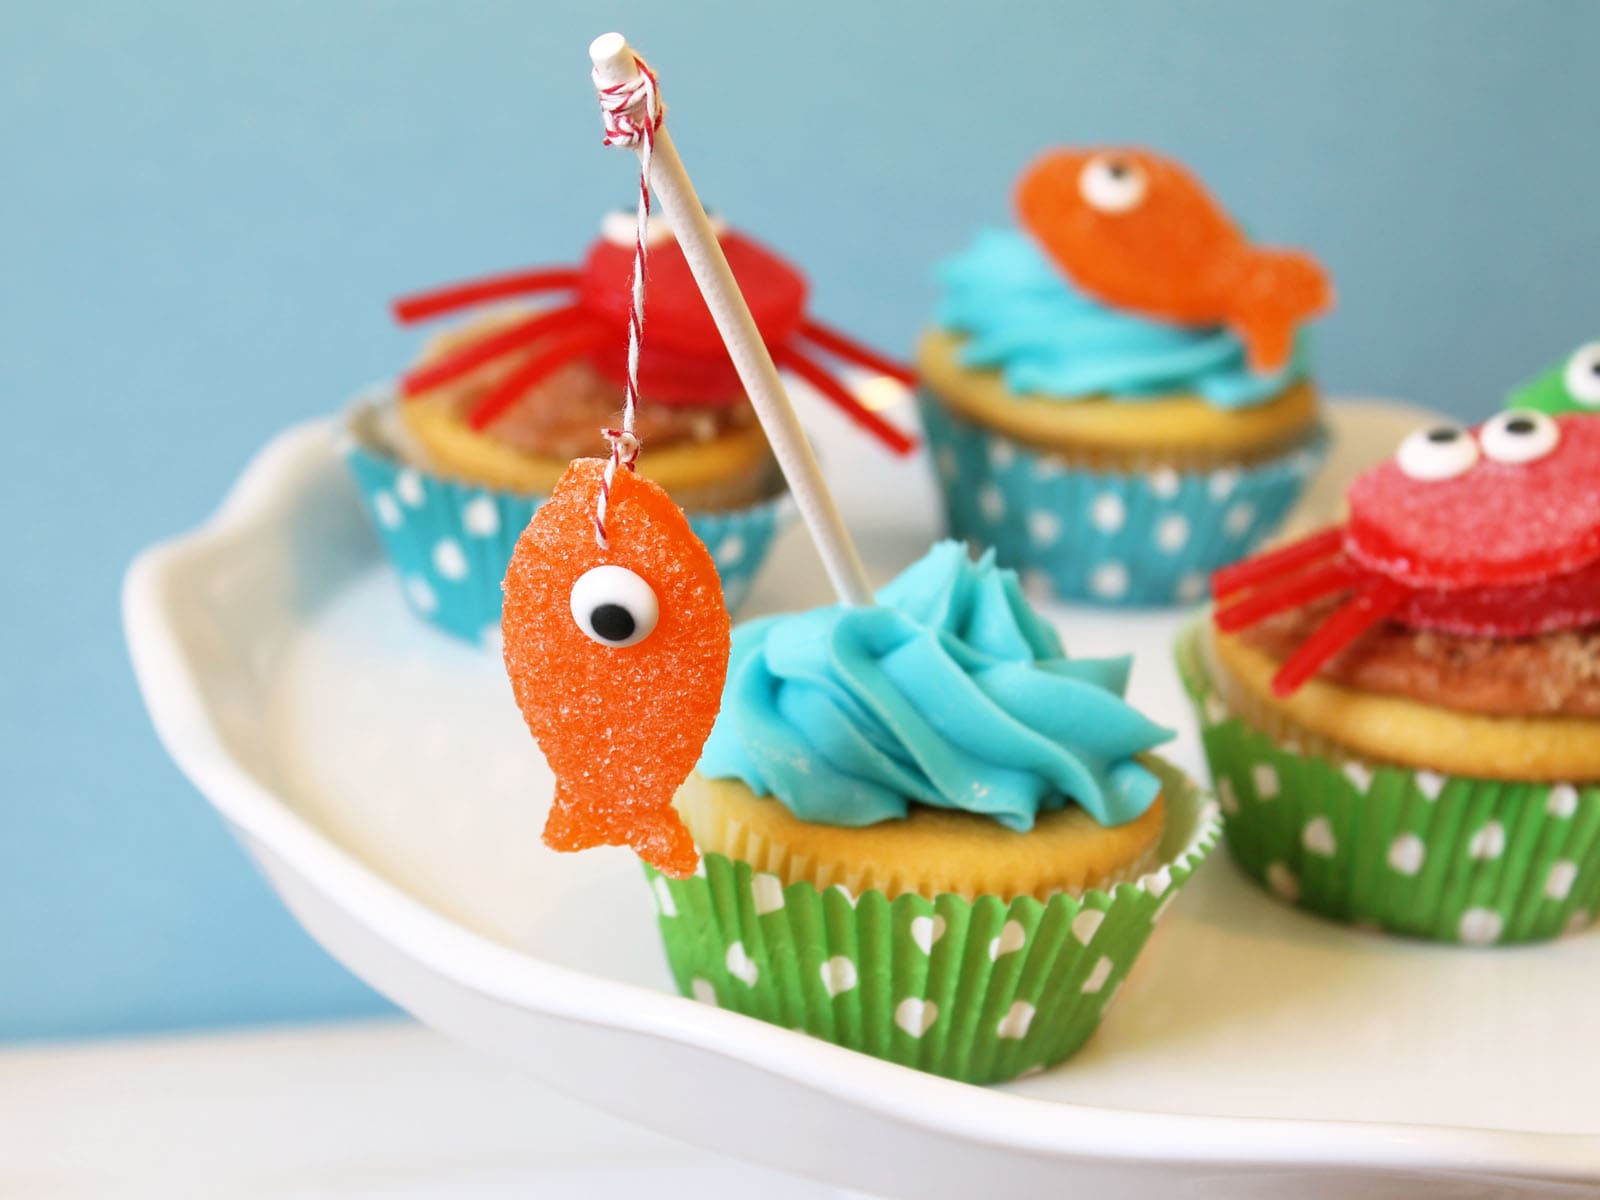 Fish cupcakes and summer cupcake ideas: gumdrop fish and crabs!